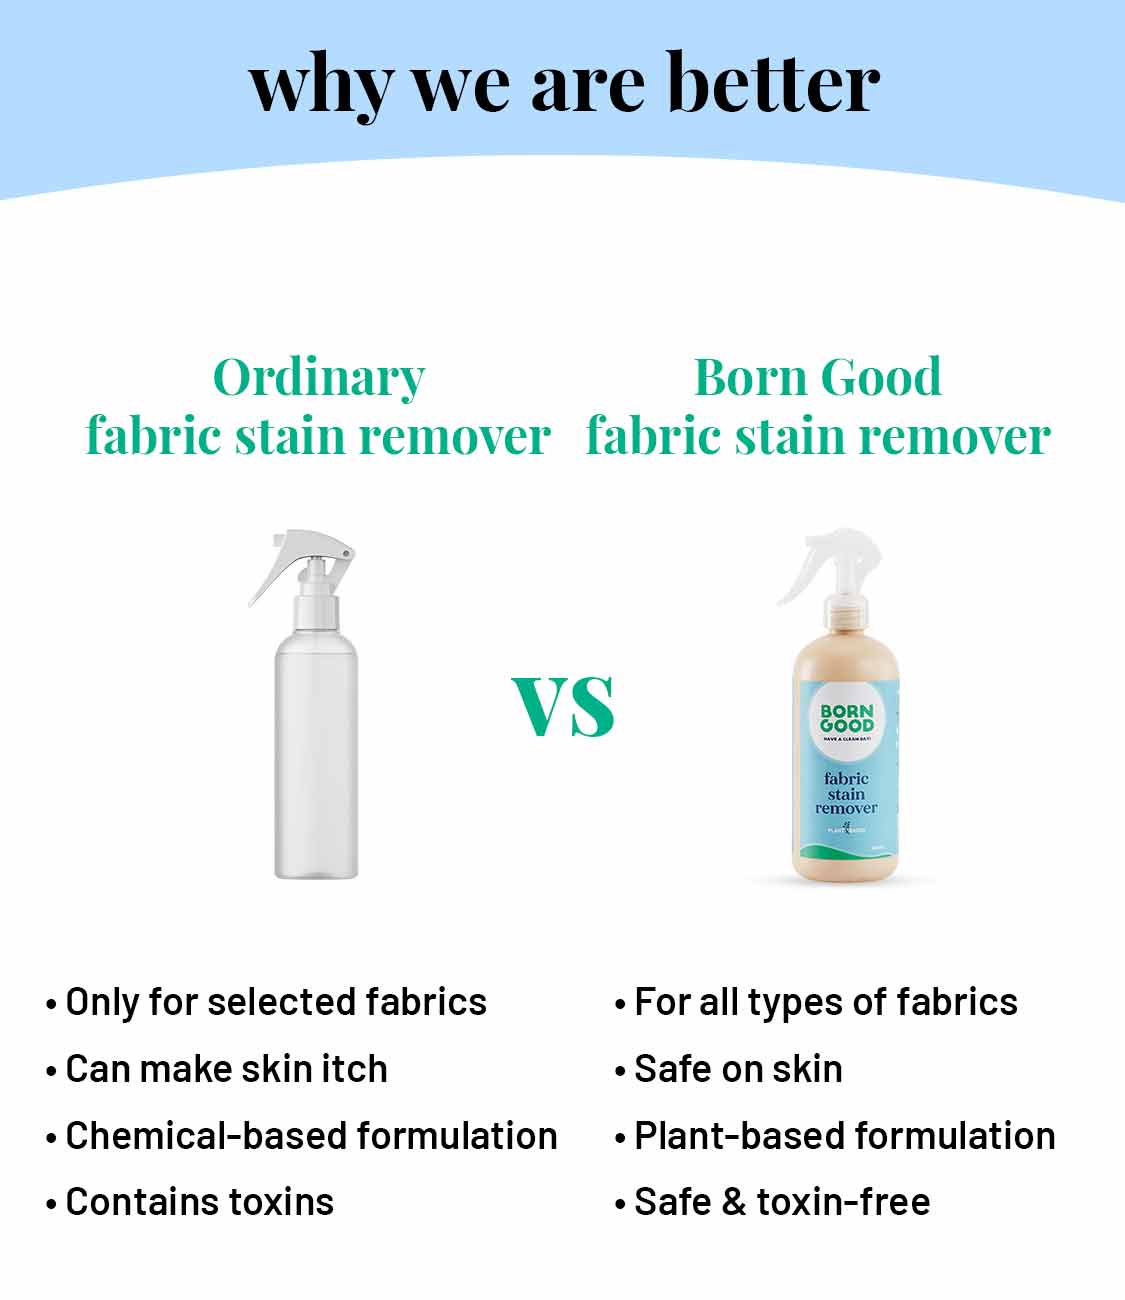 Stain & Wrinkle Remover Duo